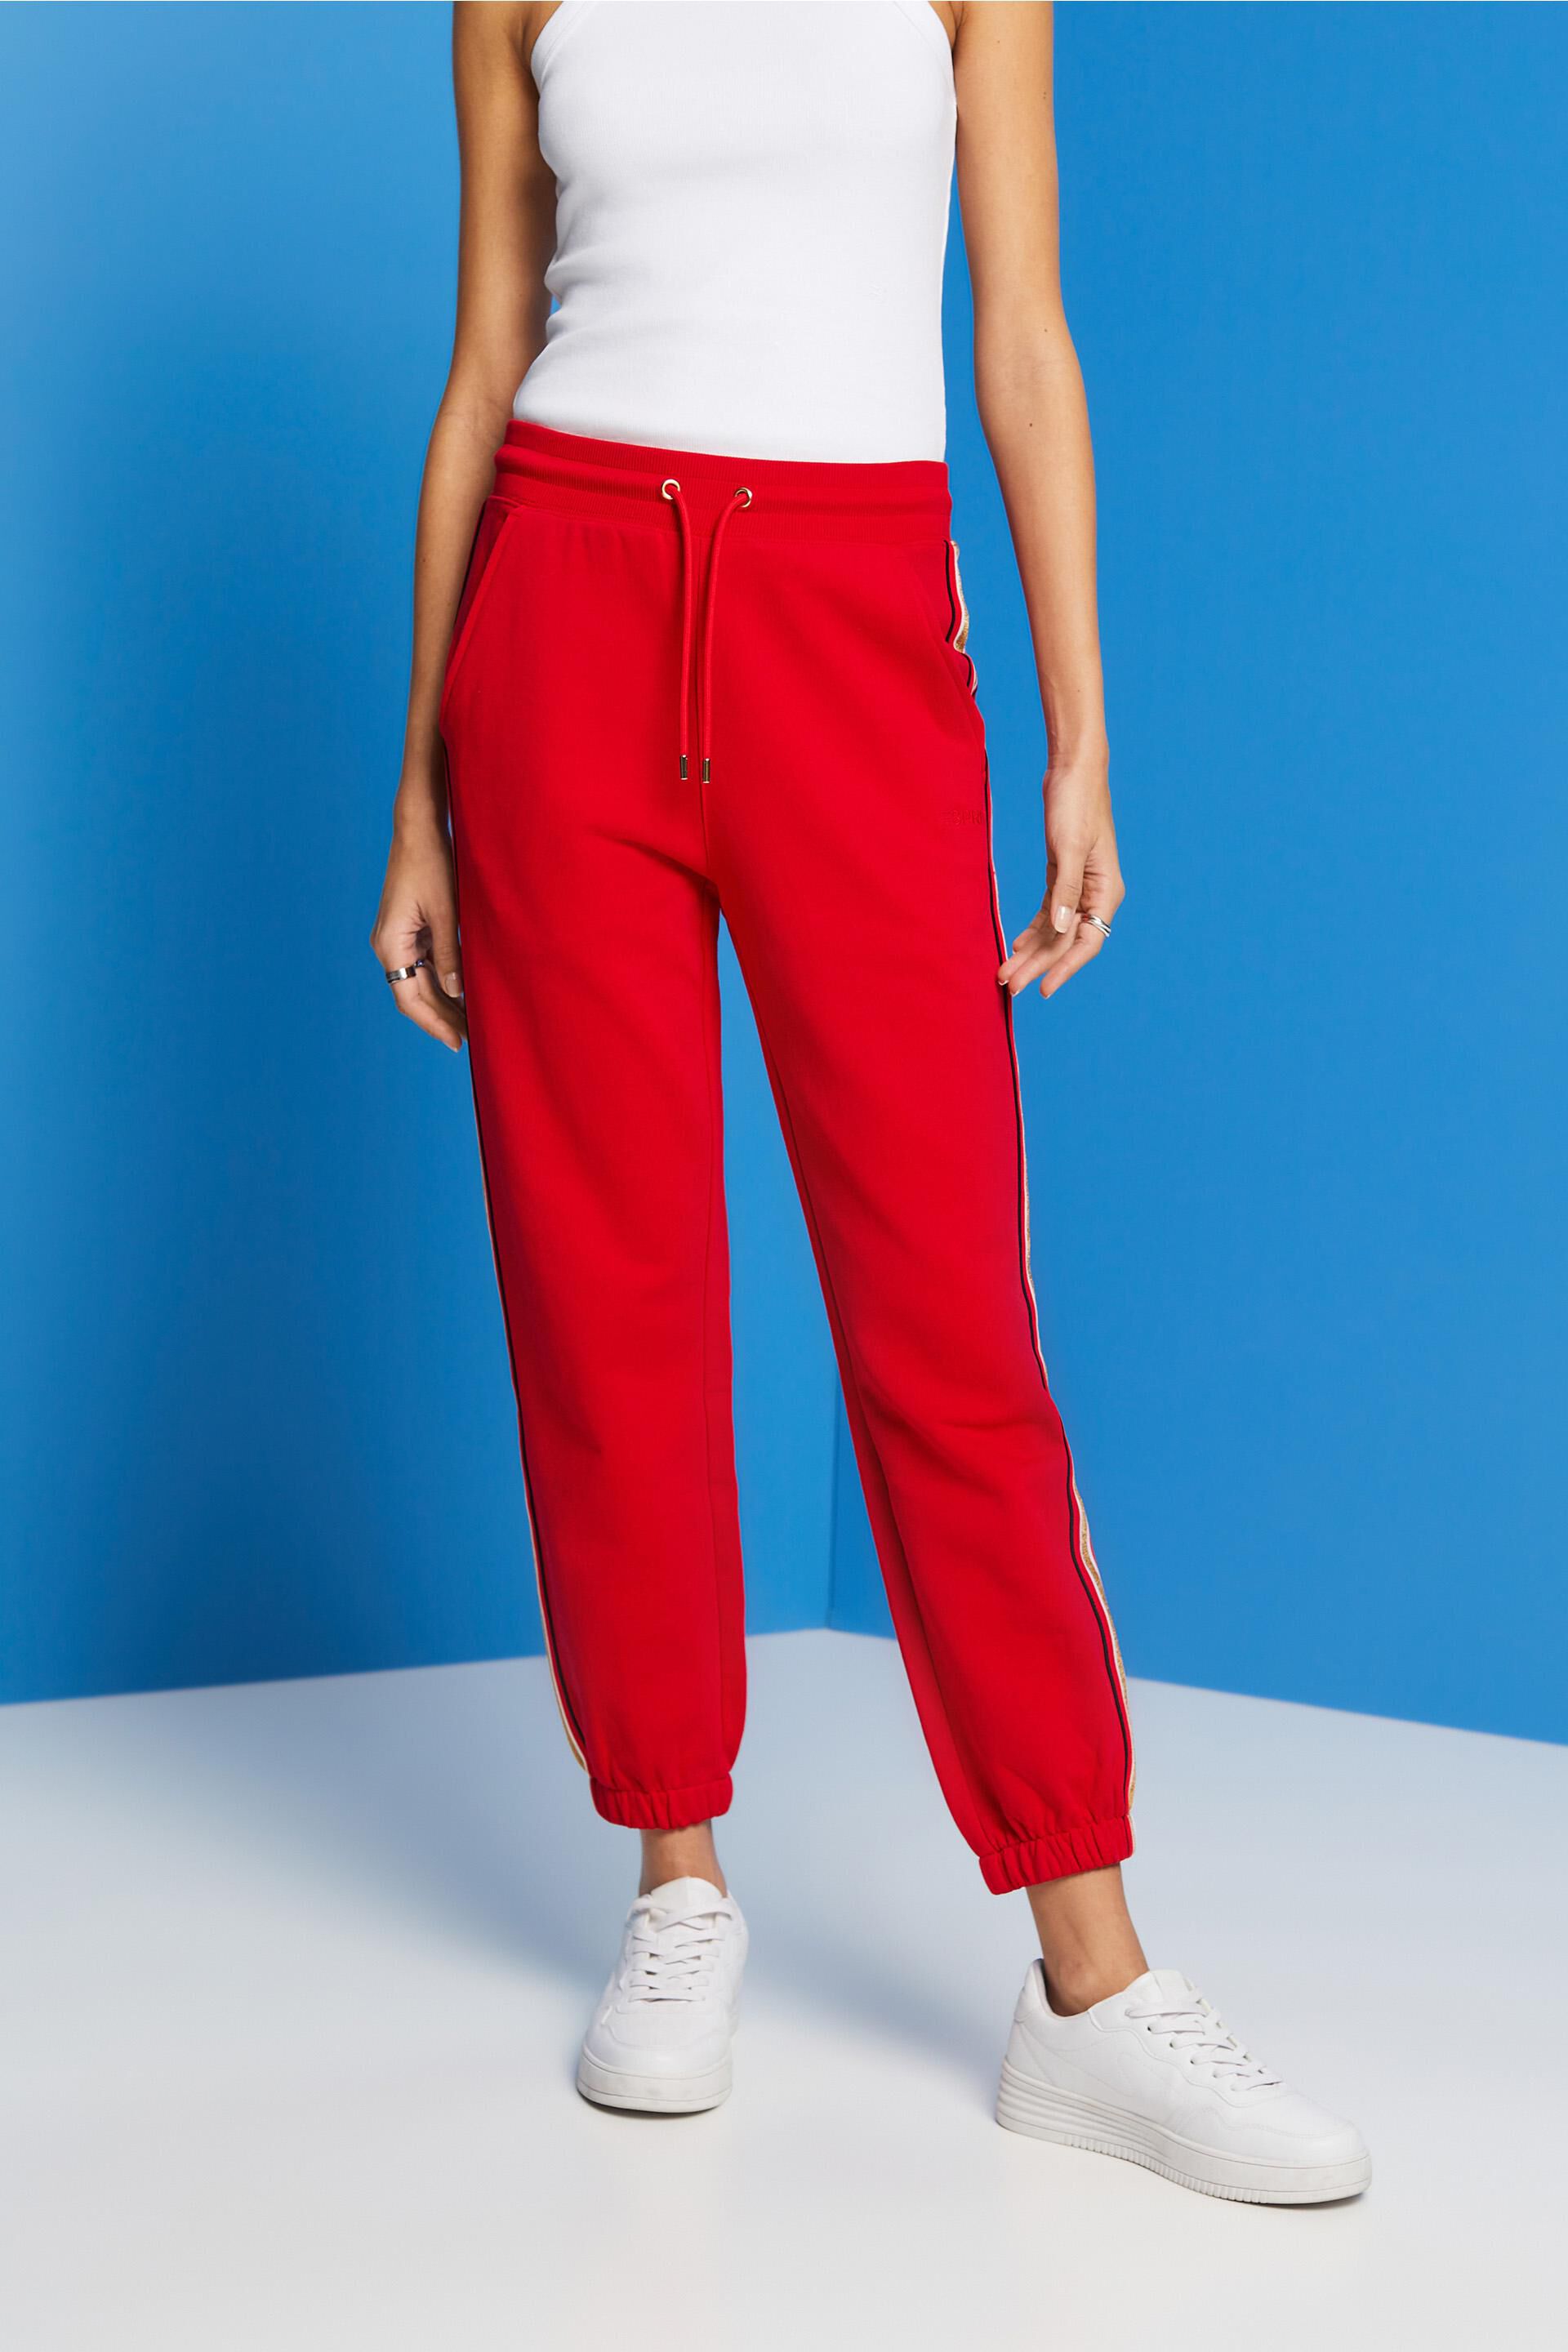 Buy HERE&NOW Joggers & Track Pants - Women | FASHIOLA INDIA